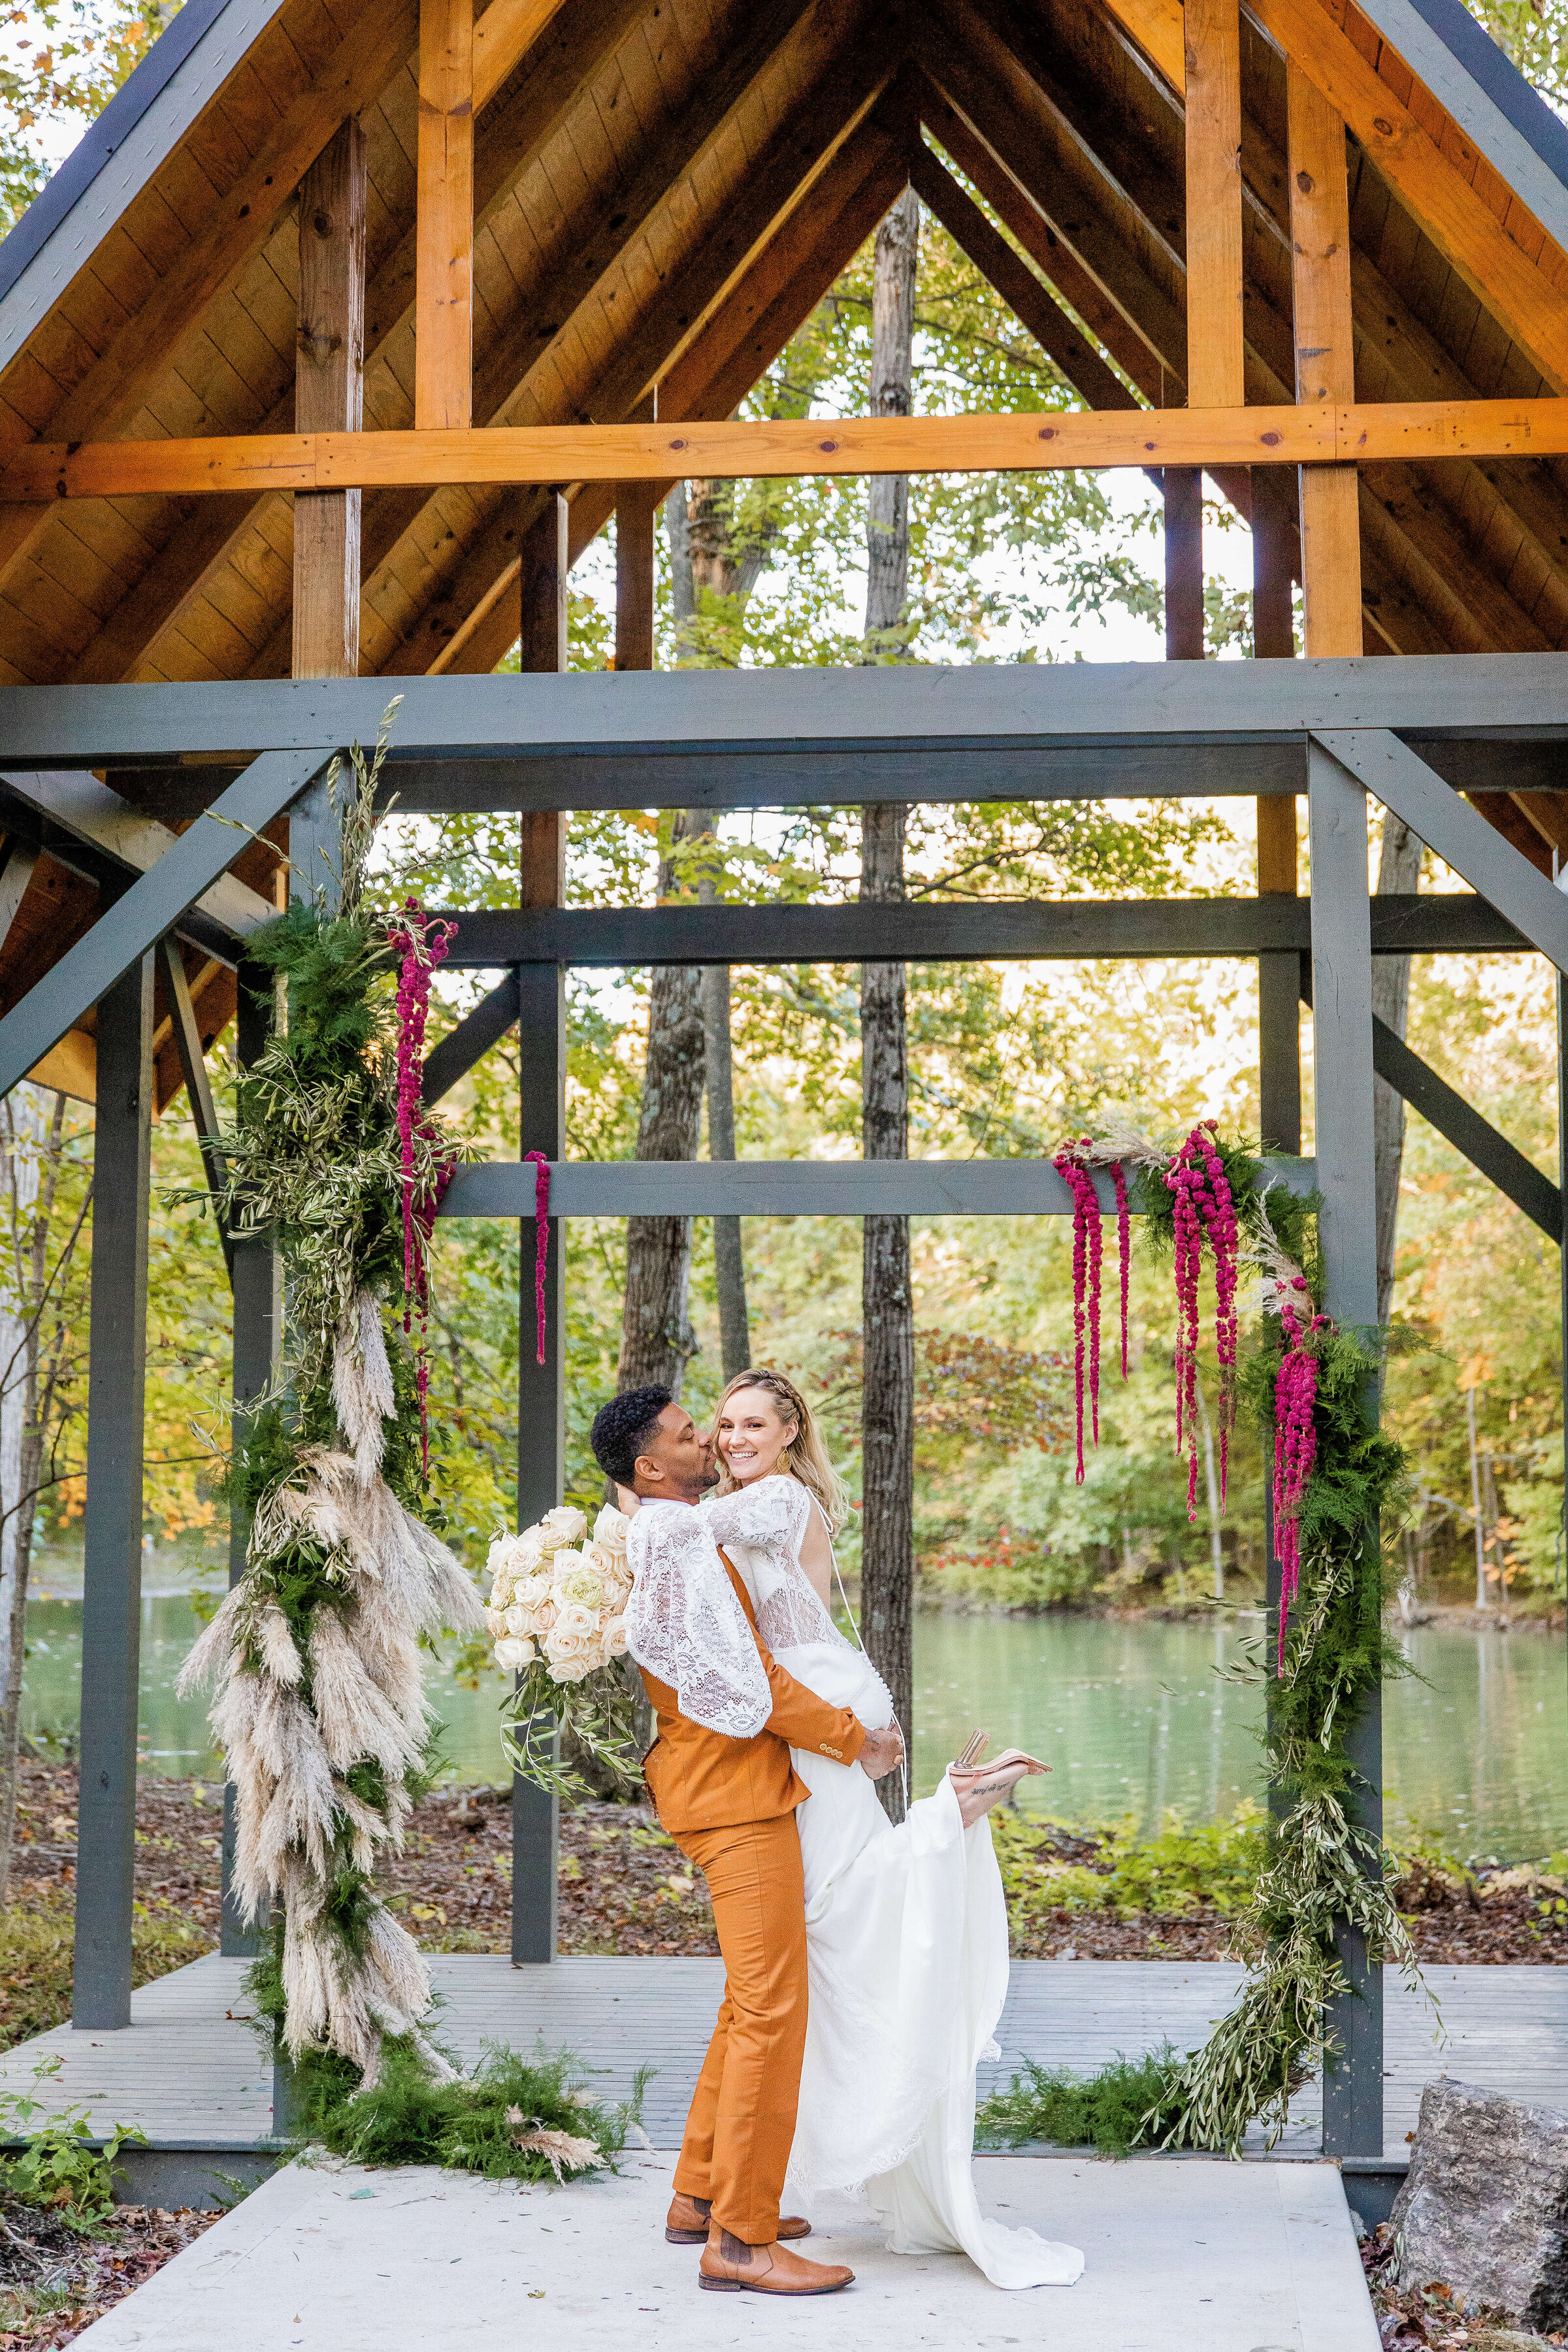 A groom in a dark orange suite picks up his bride as she smiles. They are standing under a gazebo on a lake.